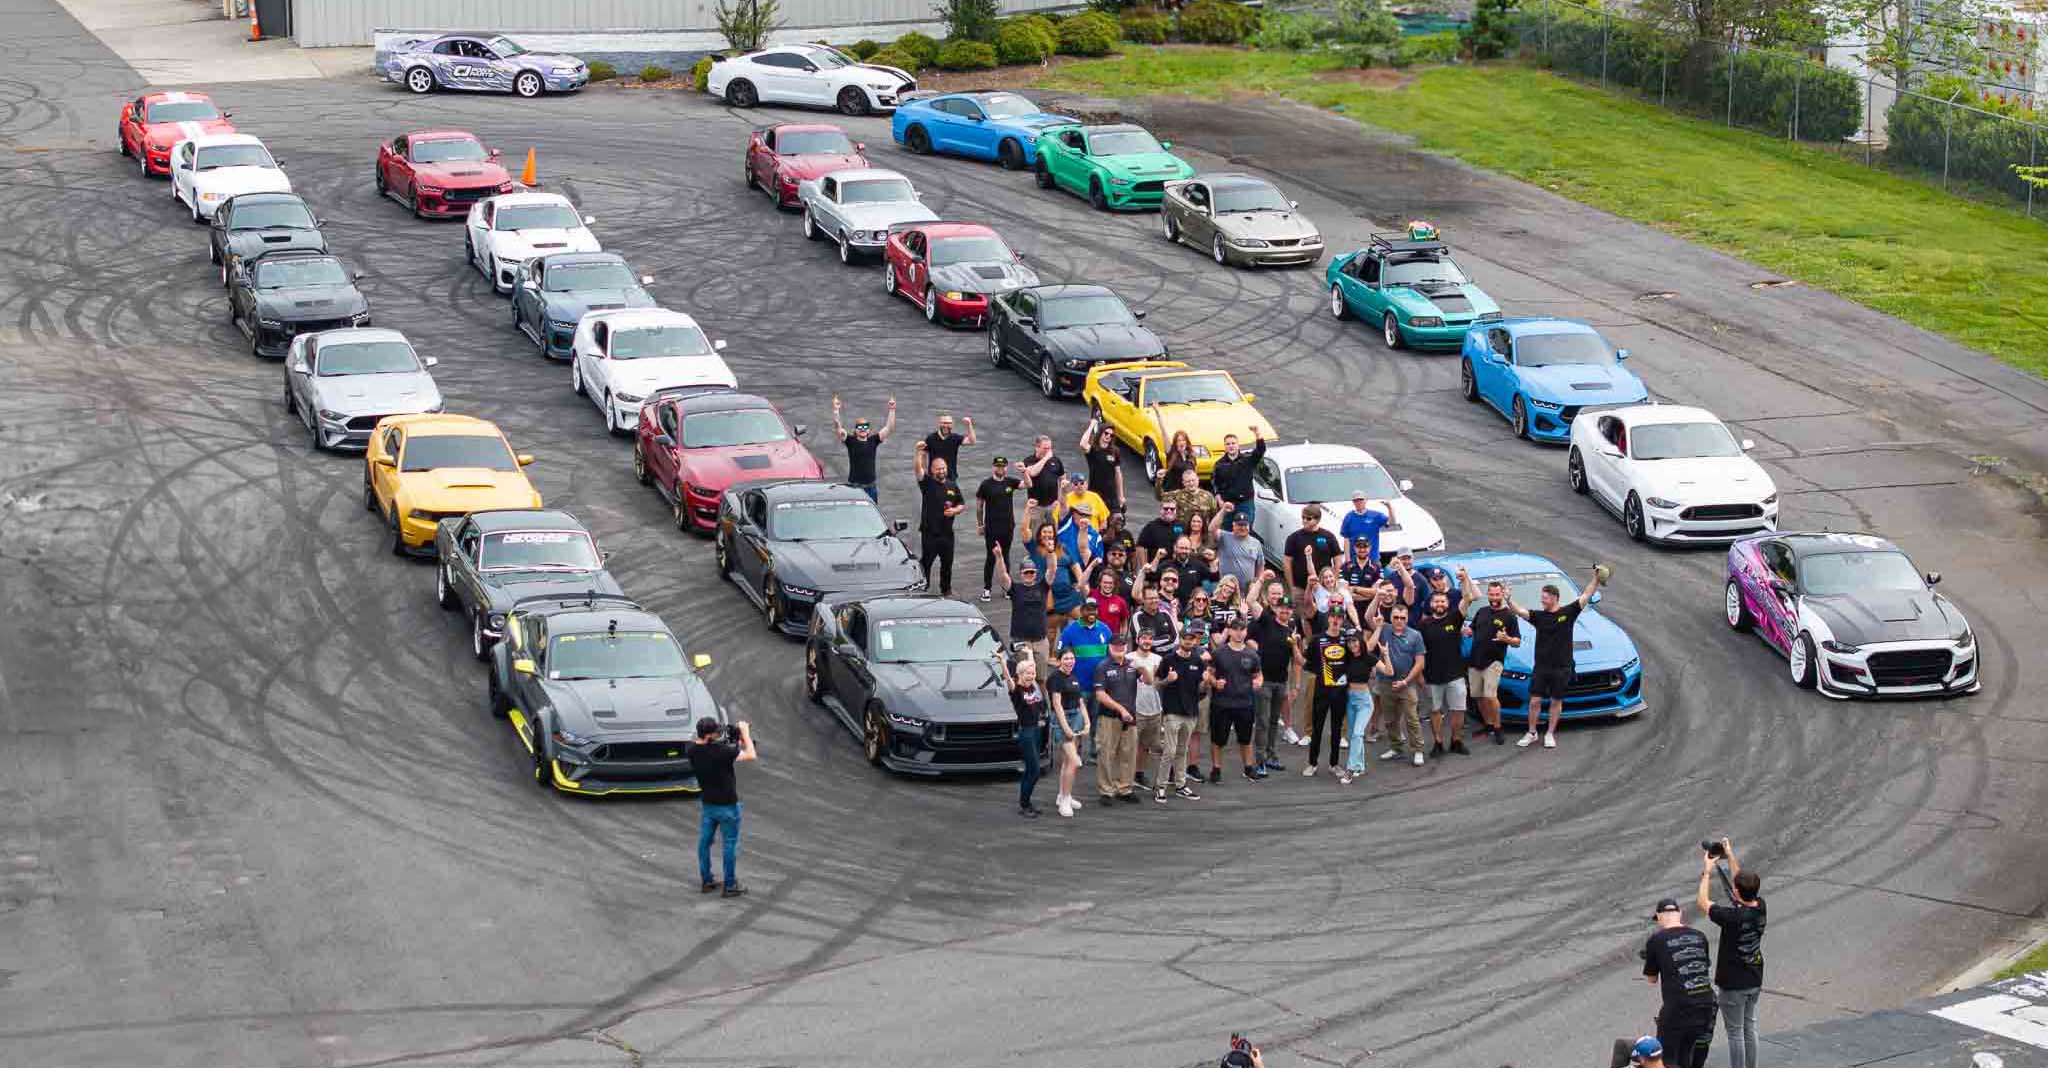 A group of Mustang owners of all different generations of Mustangs gather outside the RTR Lab